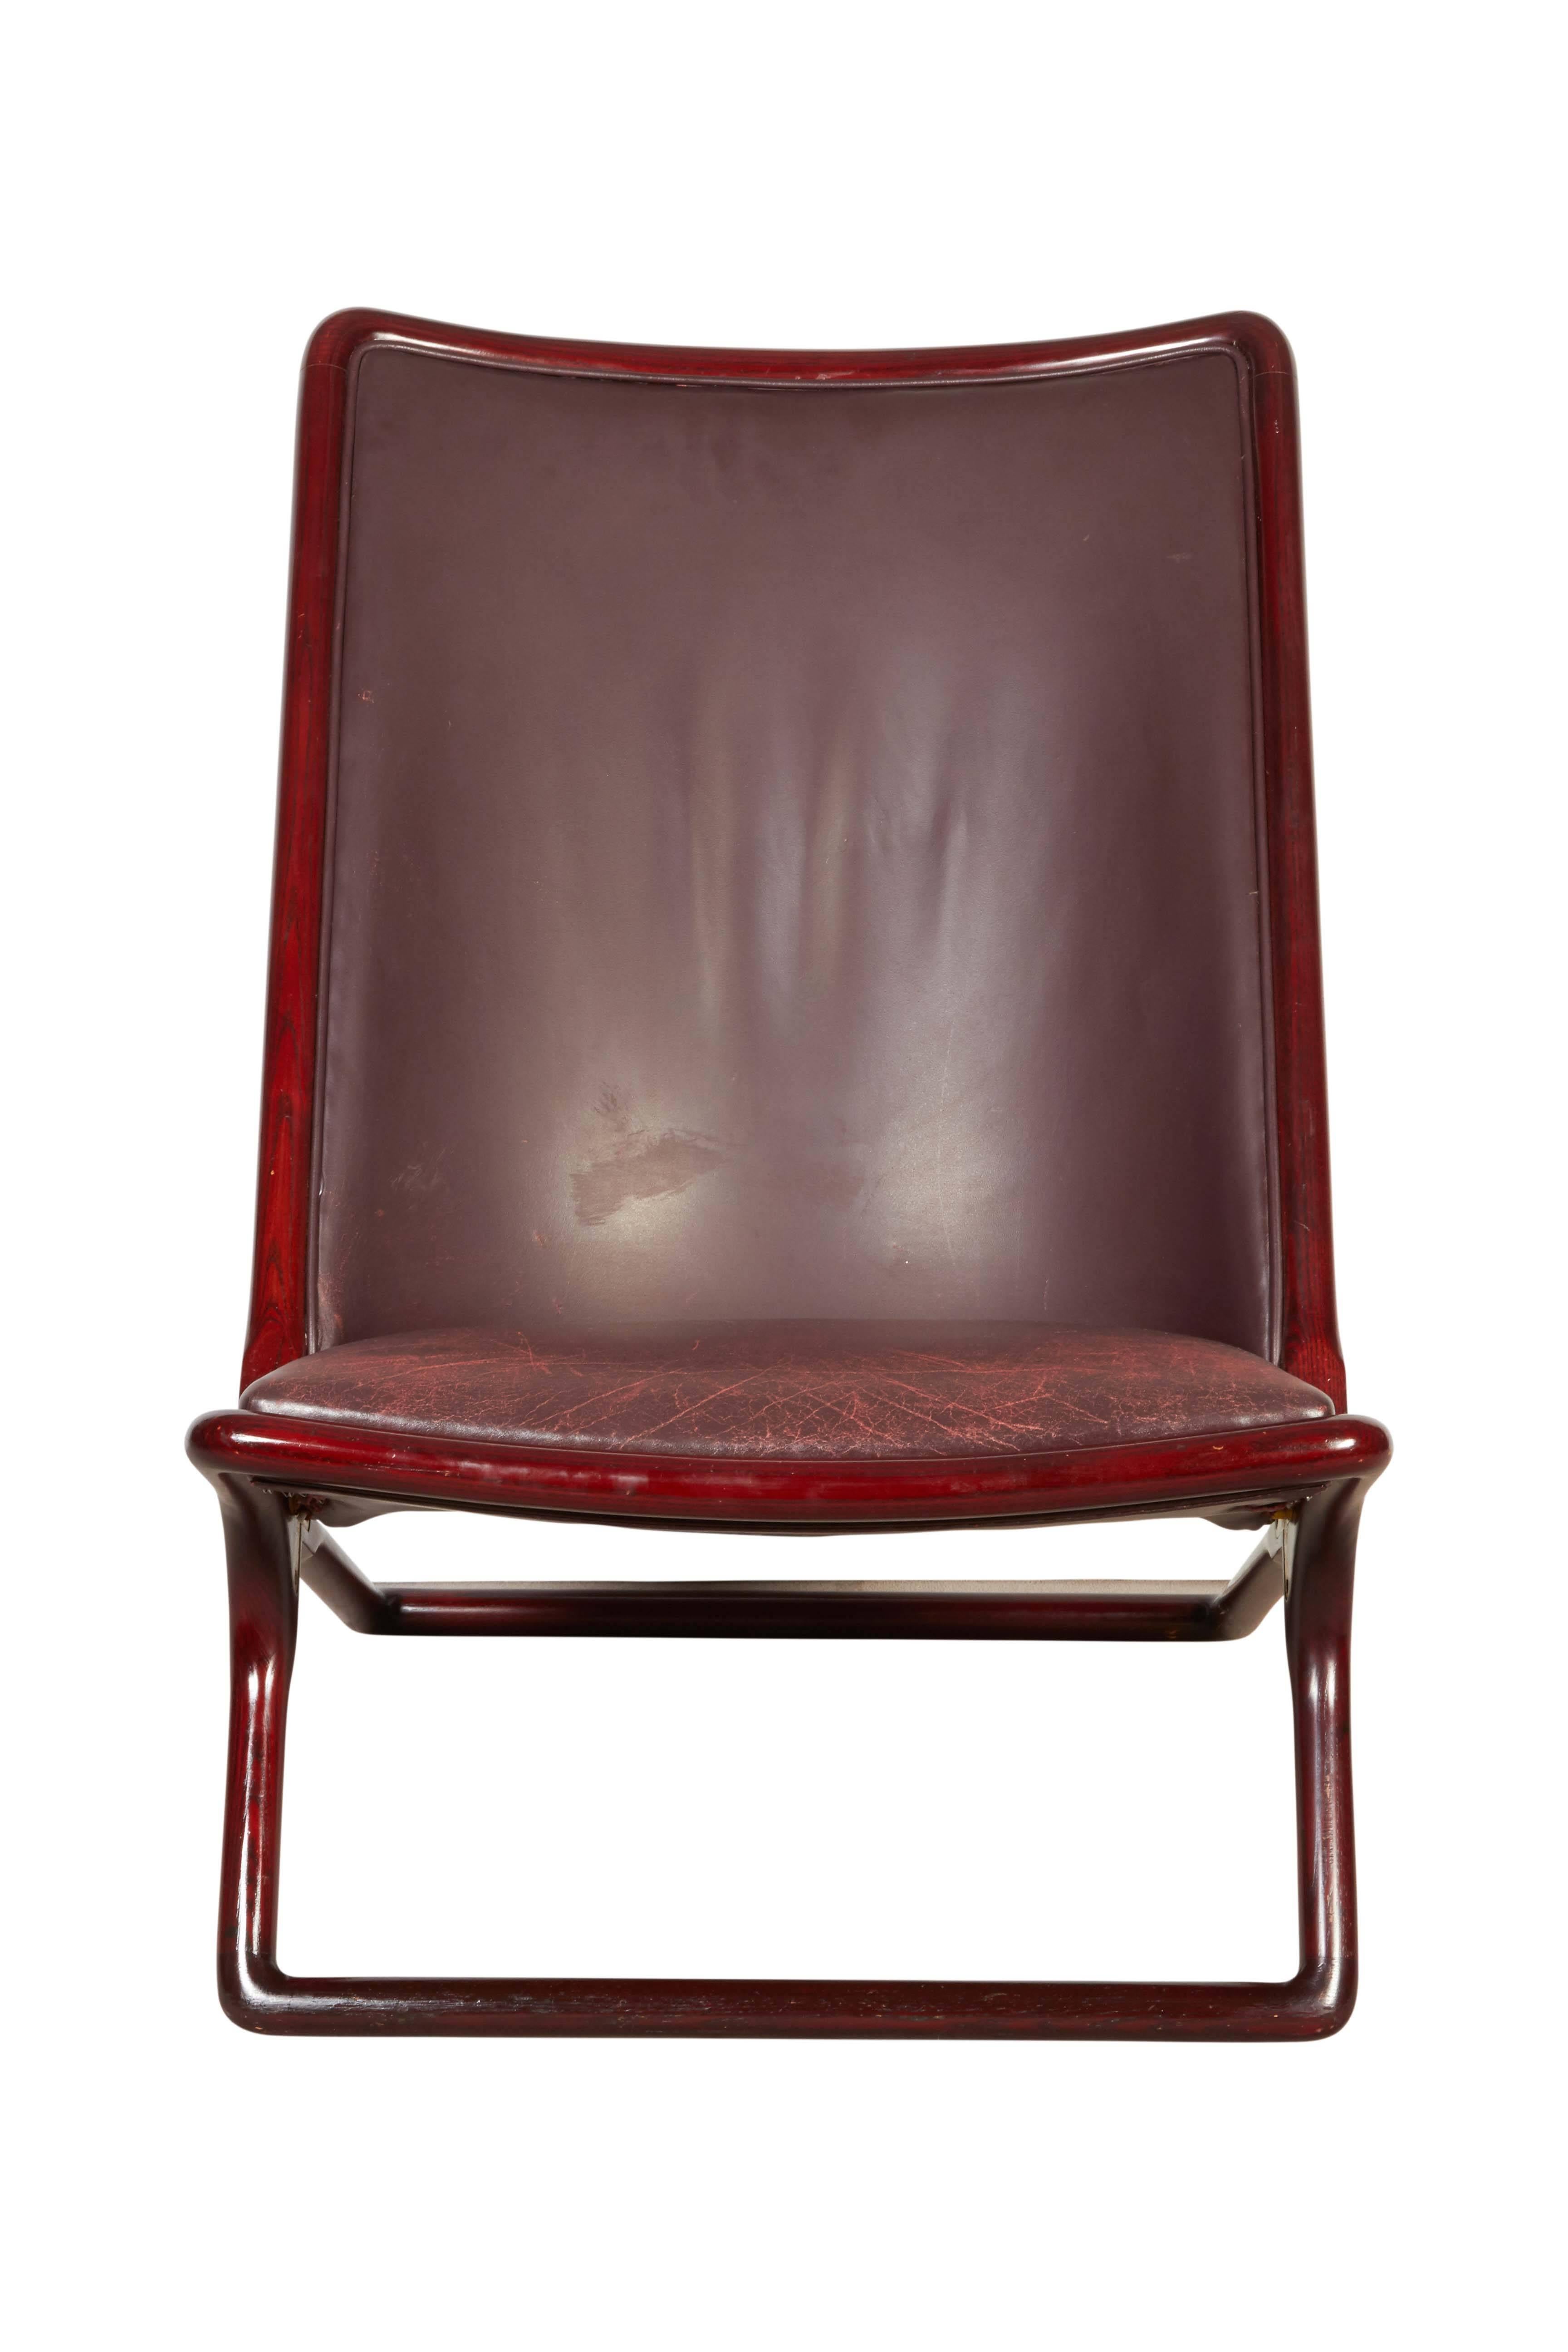 A pair of 'Scissor' lounge chairs designed by Ward Bennett for Brickel Associates of Wisconsin, manufactured circa 1970s, each with rich stained wood frames, upholstered in deep burgundy leather with piping. Markings include label [Ward Bennet